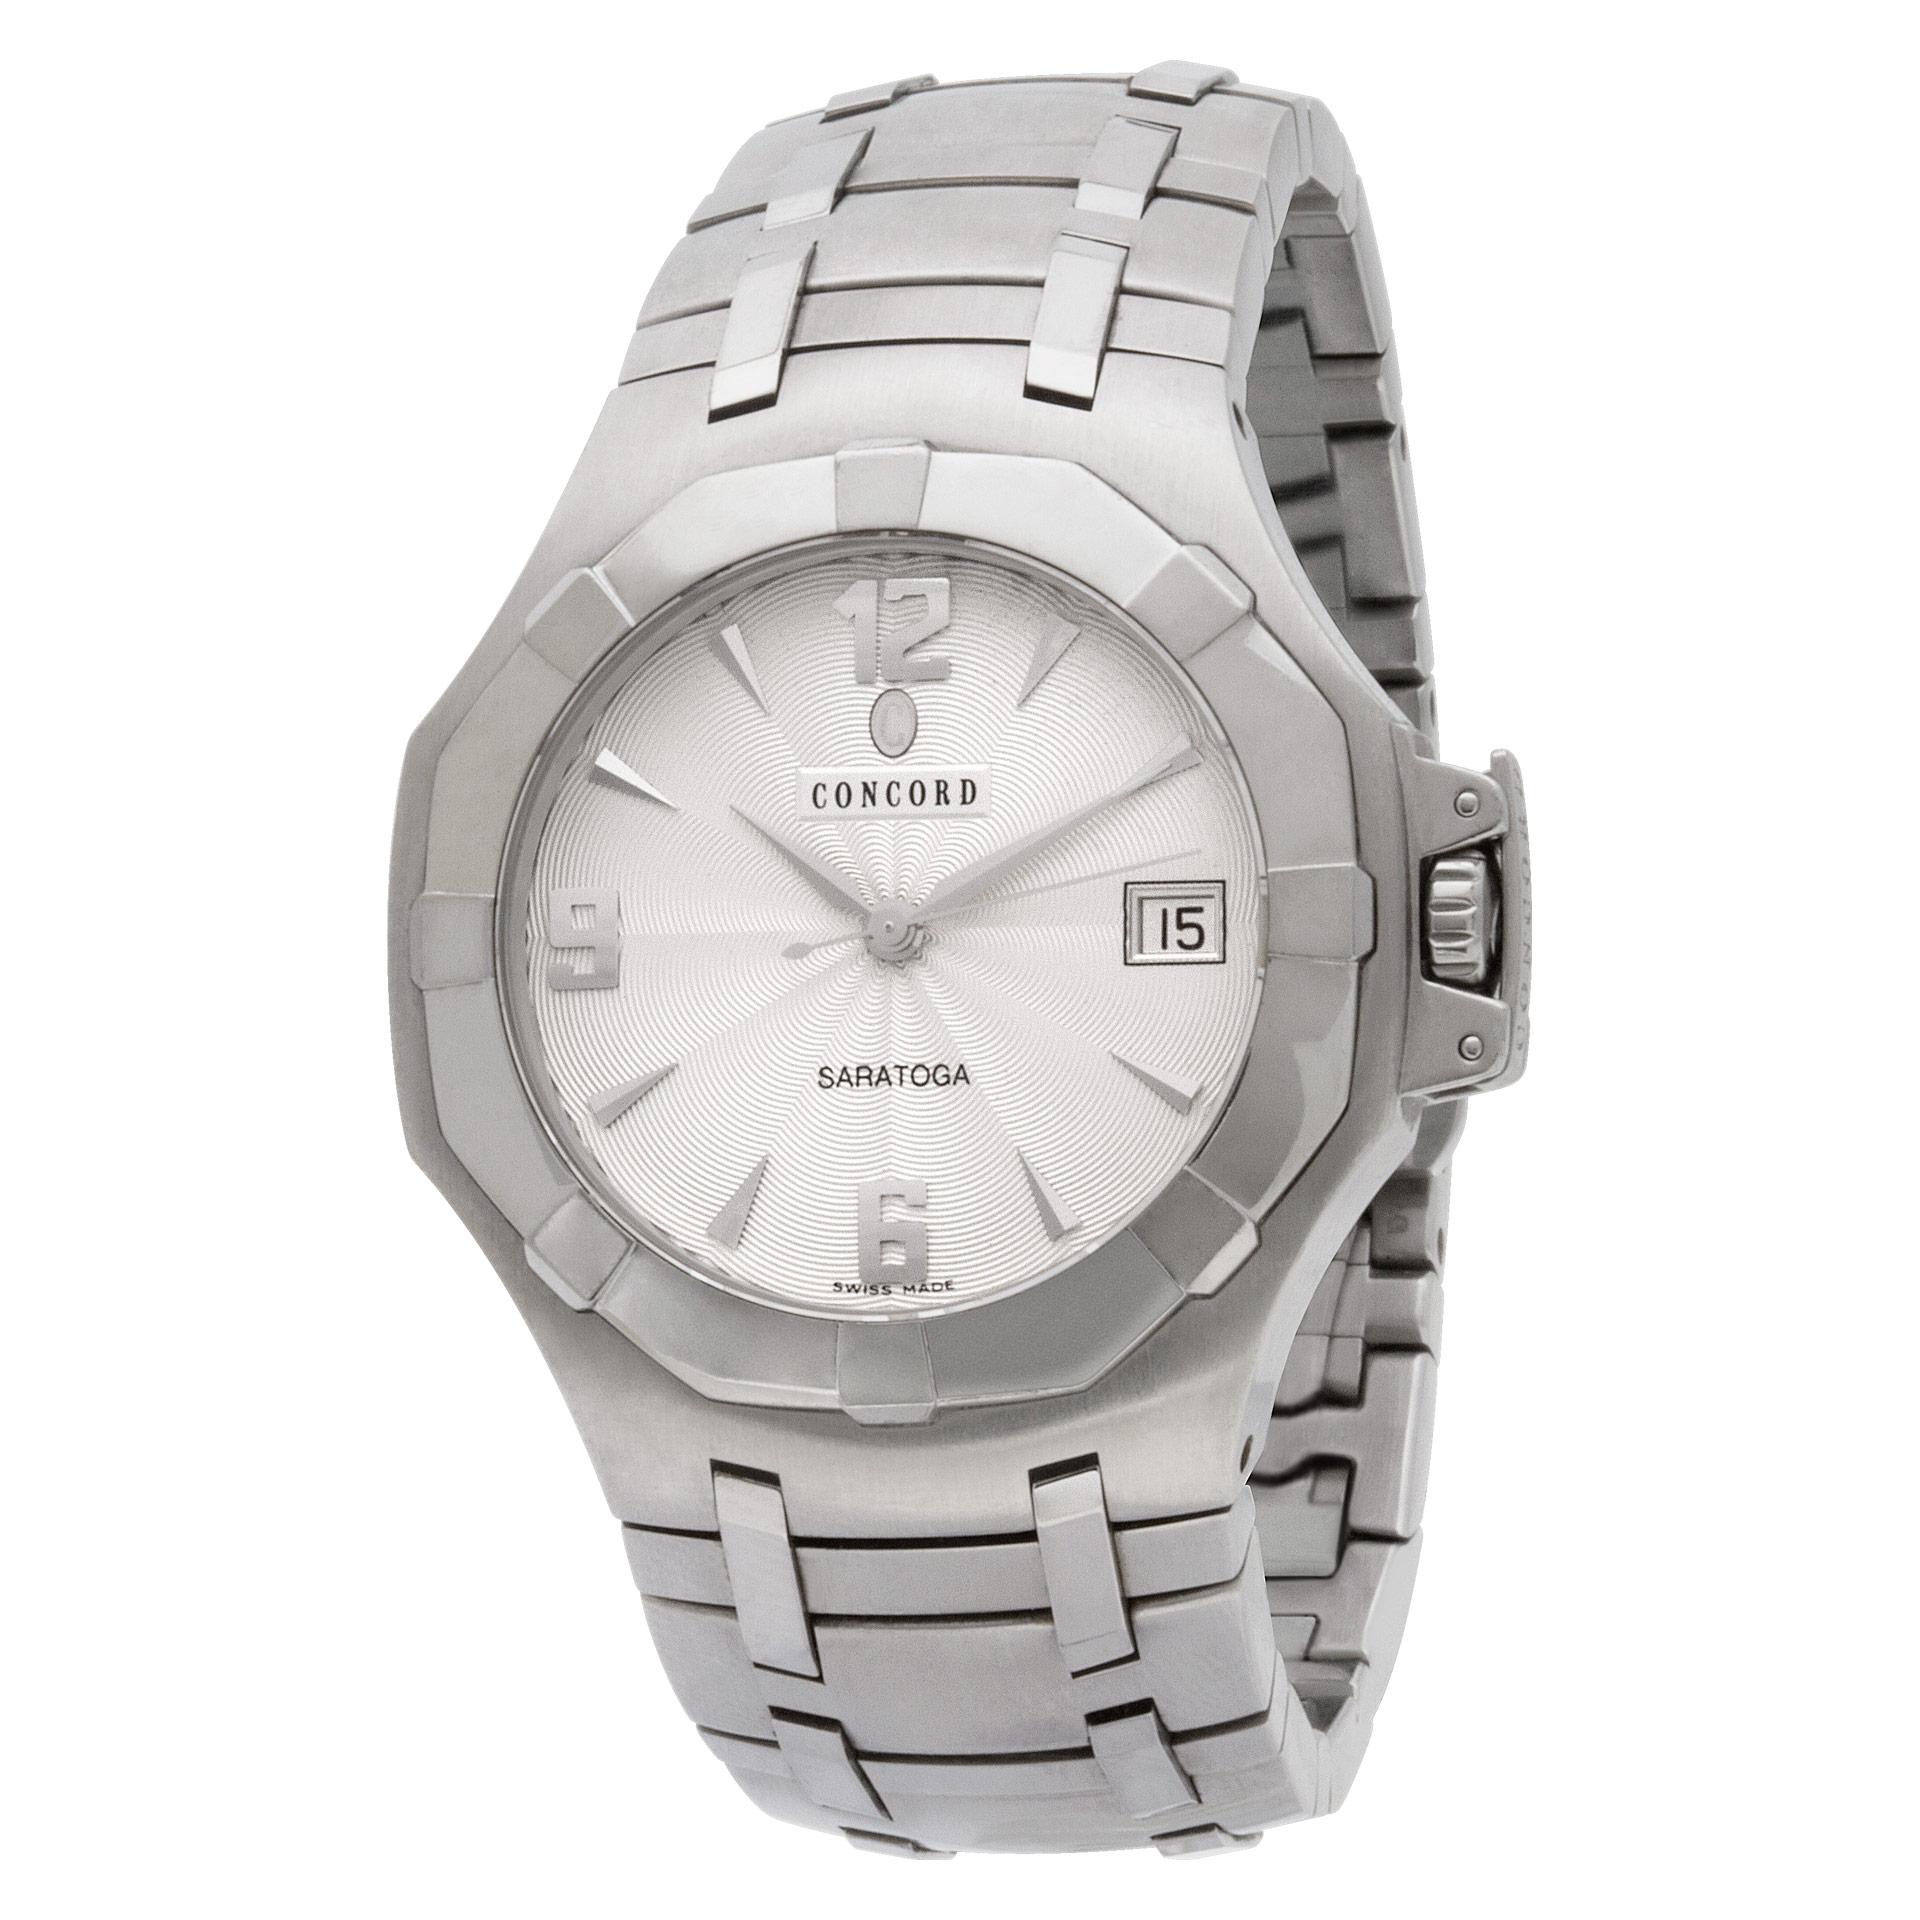 Concord Saratoga in stainless steel. Quartz w/ sweep seconds and date. Ref 14.c2.1894. 37mm case size. Circa 2000s. Fine Pre-owned Concord Watch.

Certified preowned Sport Concord Saratoga 14.c2.1894 watch is made out of Stainless steel on a